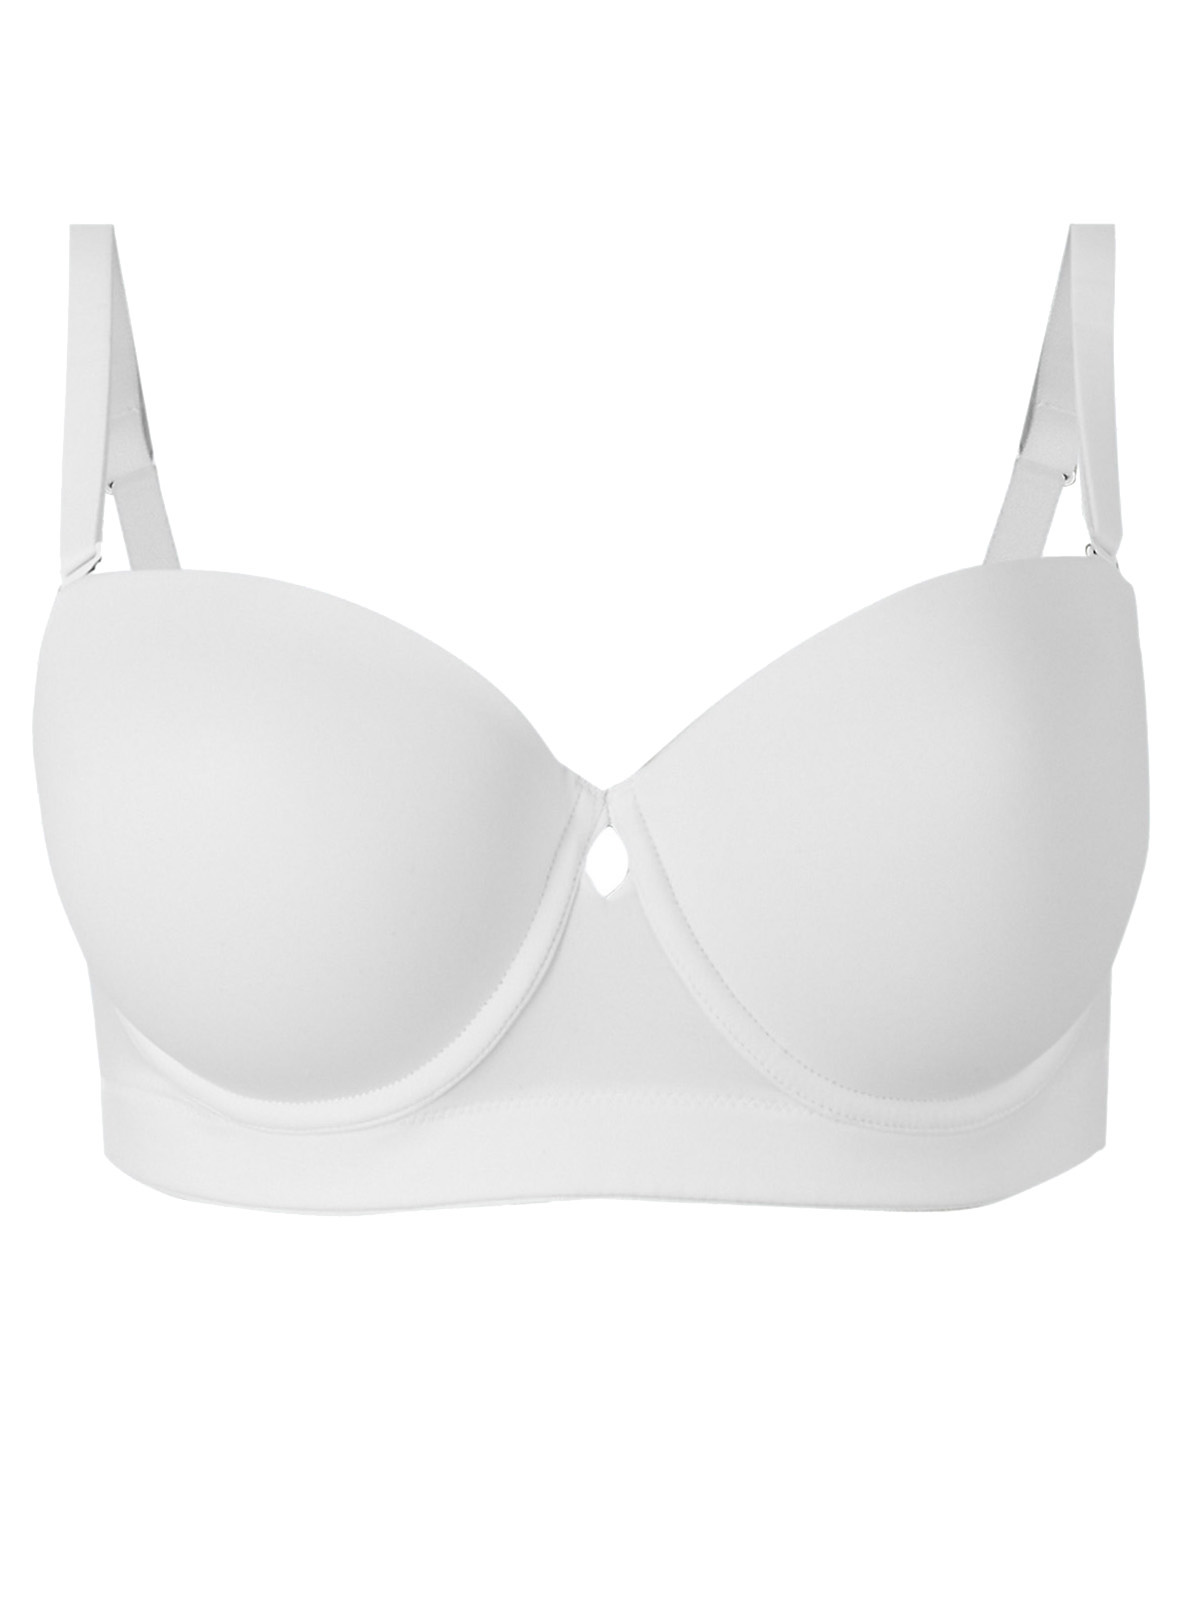 Marks and Spencer - - IRREGULAR - M&5 ASSORTED Plain, Lace & Strapless ...